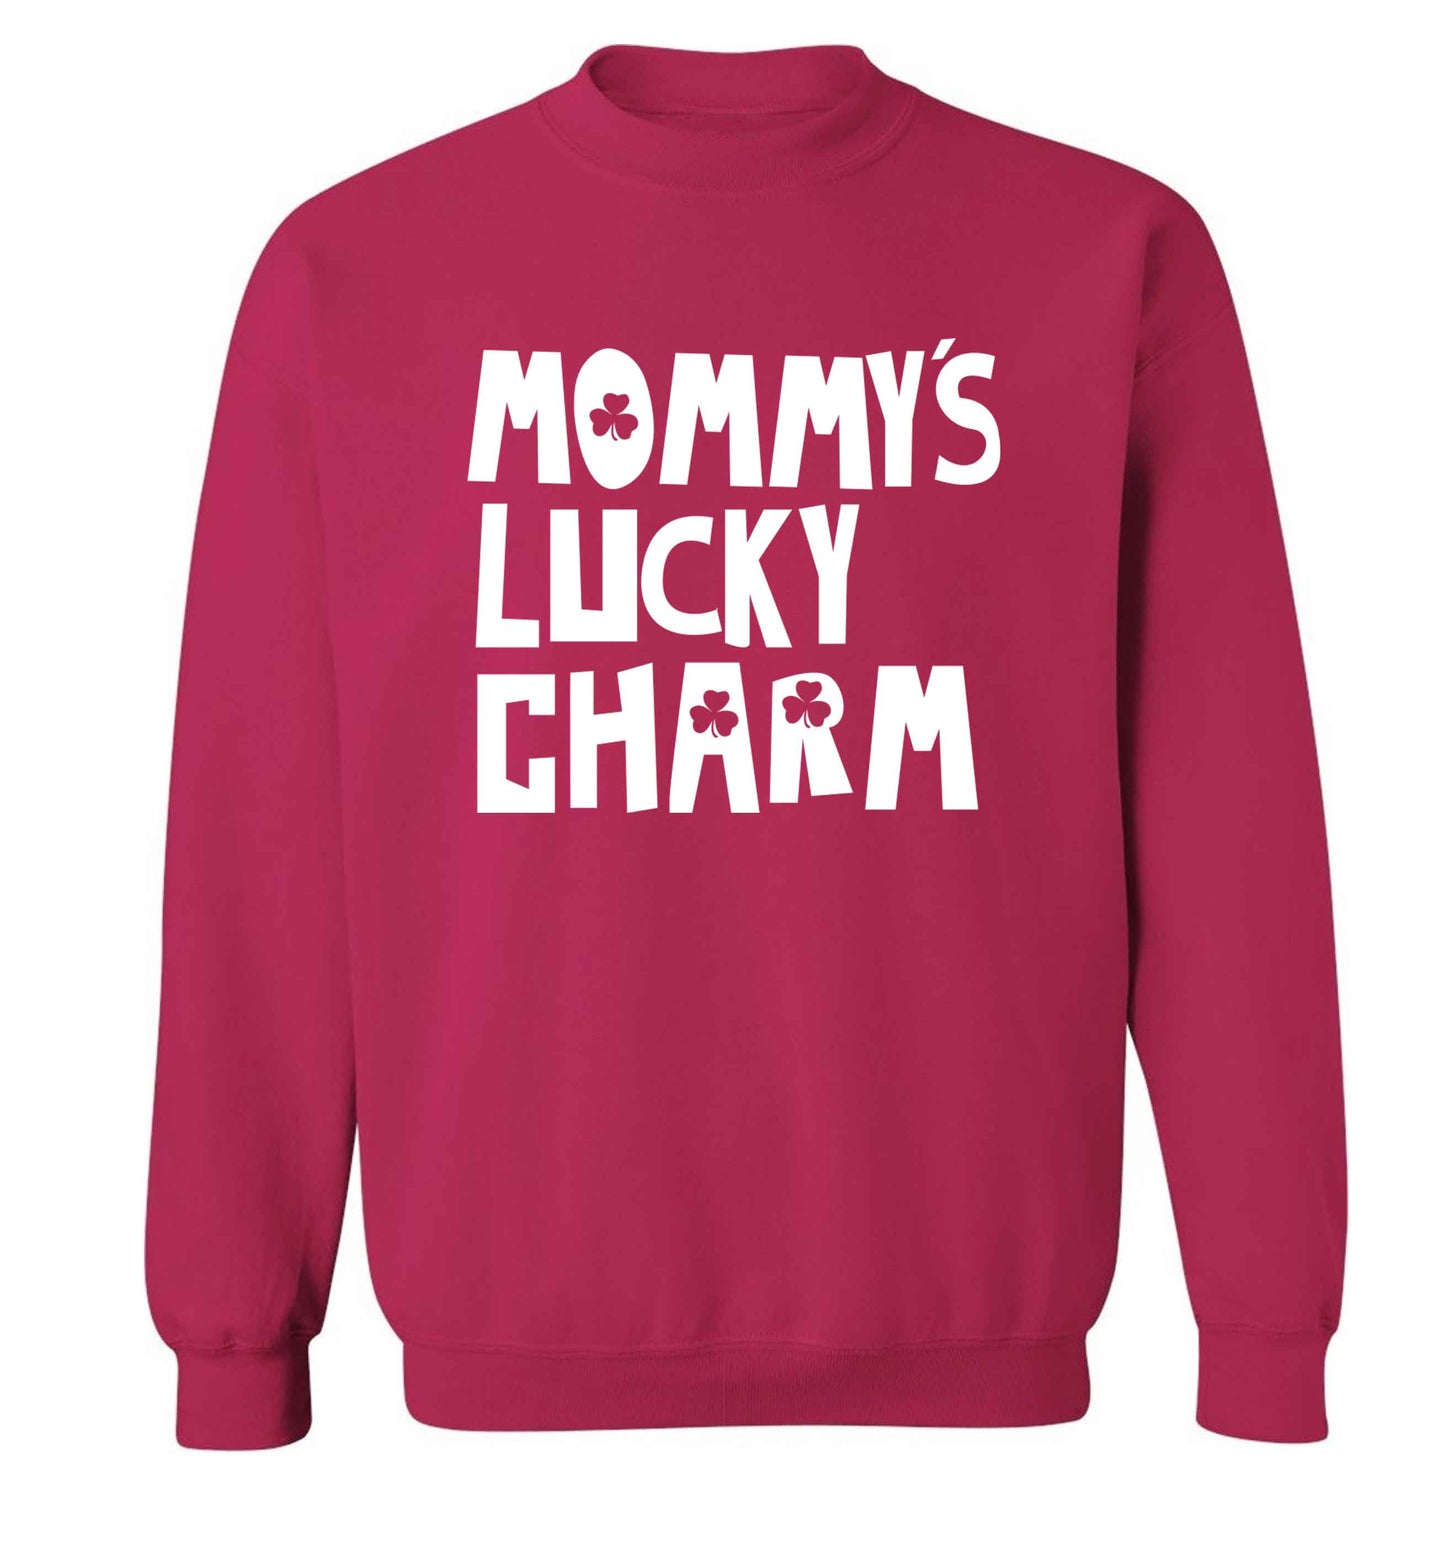 Mommy's lucky charm adult's unisex pink sweater 2XL